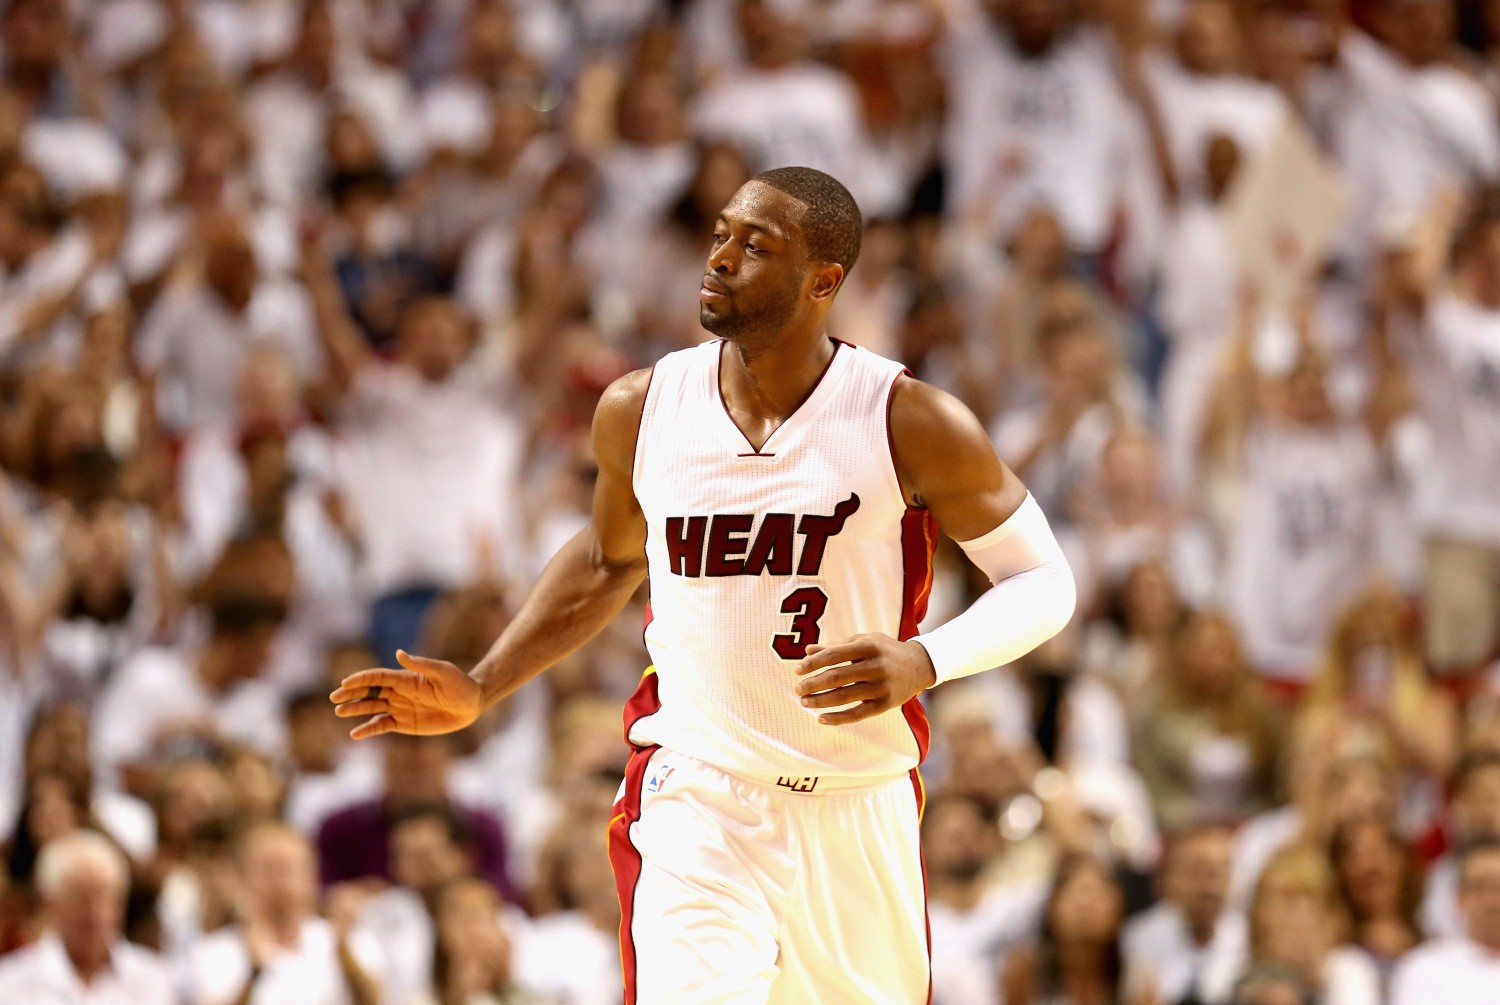 Dwyane Wade Returns: “My Eyes And Heart” Never Left Miami